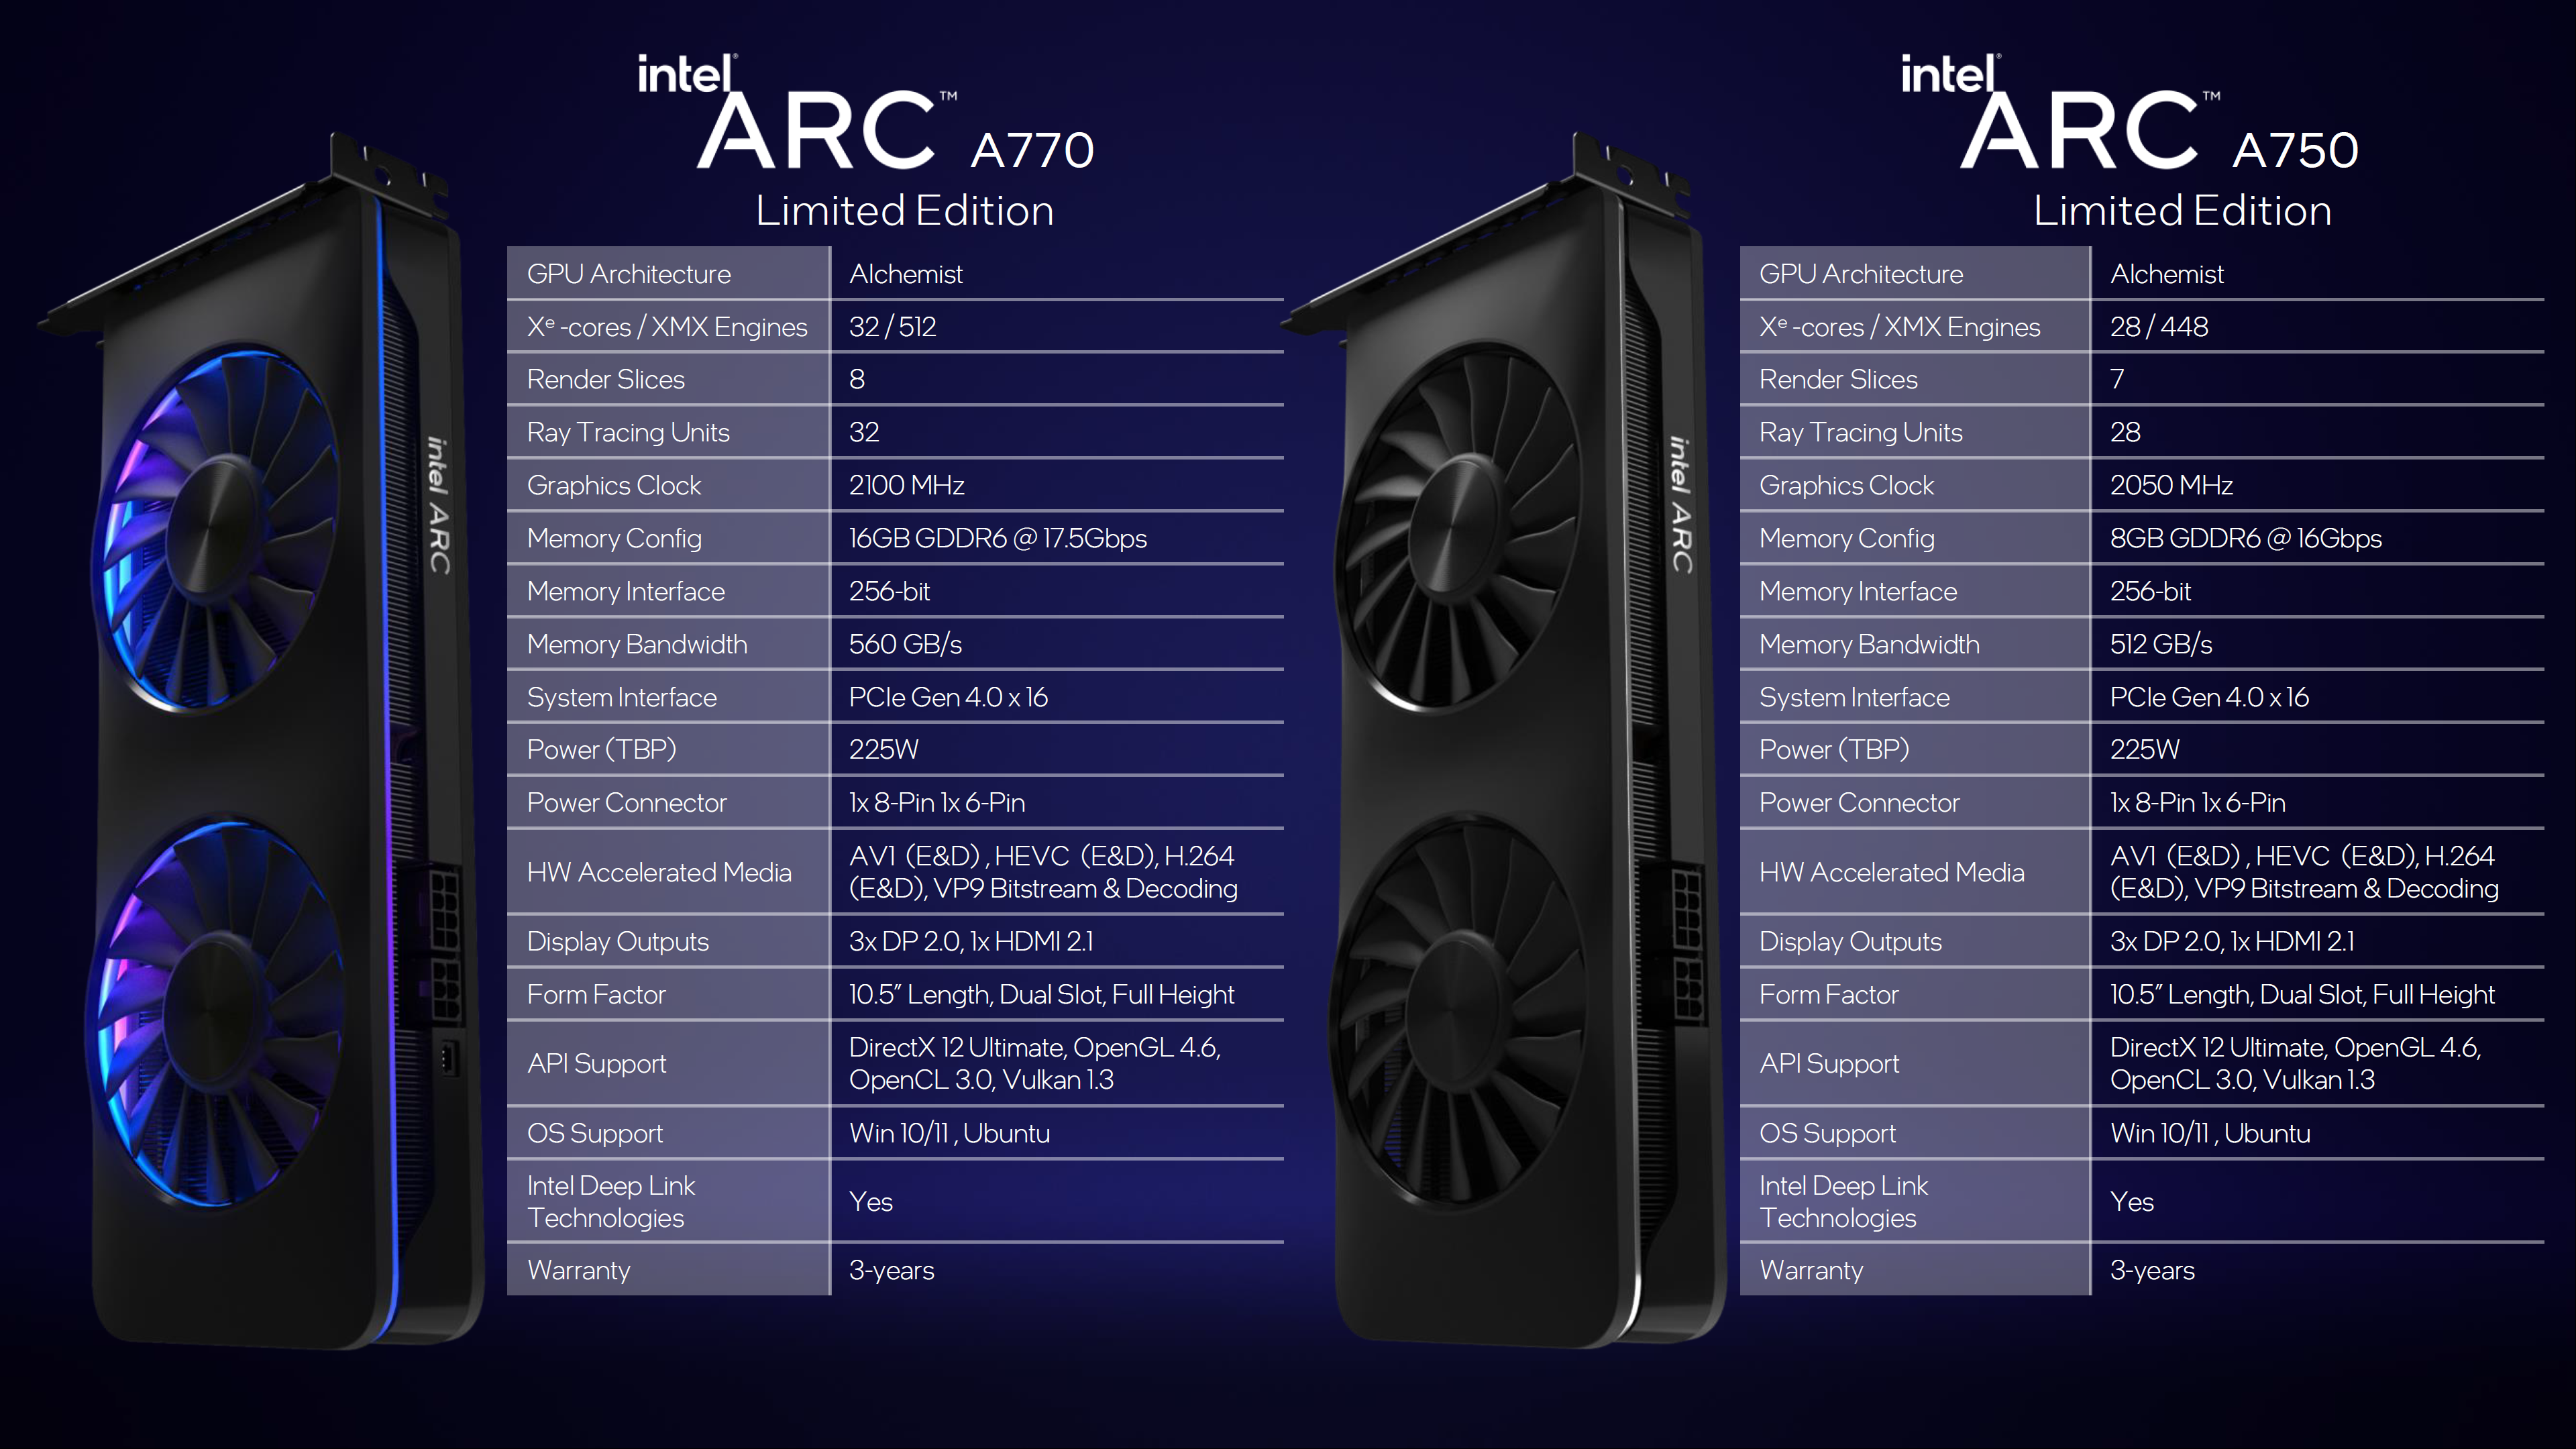 Intel-Arc-A770-Arc-A750-12th-October-Launch-Confirmd-329-289-US-Price-_3.png